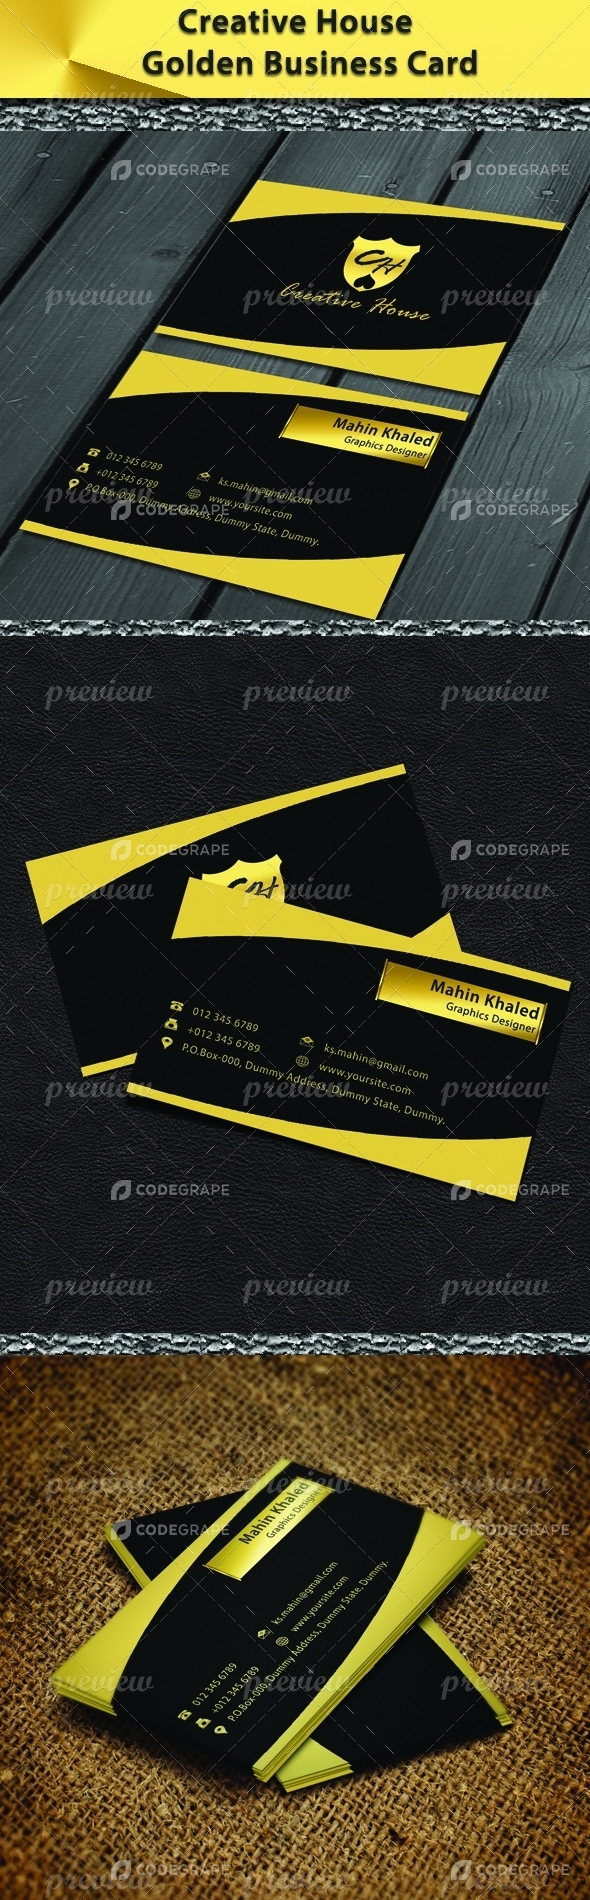 Business Card (Gold Version)